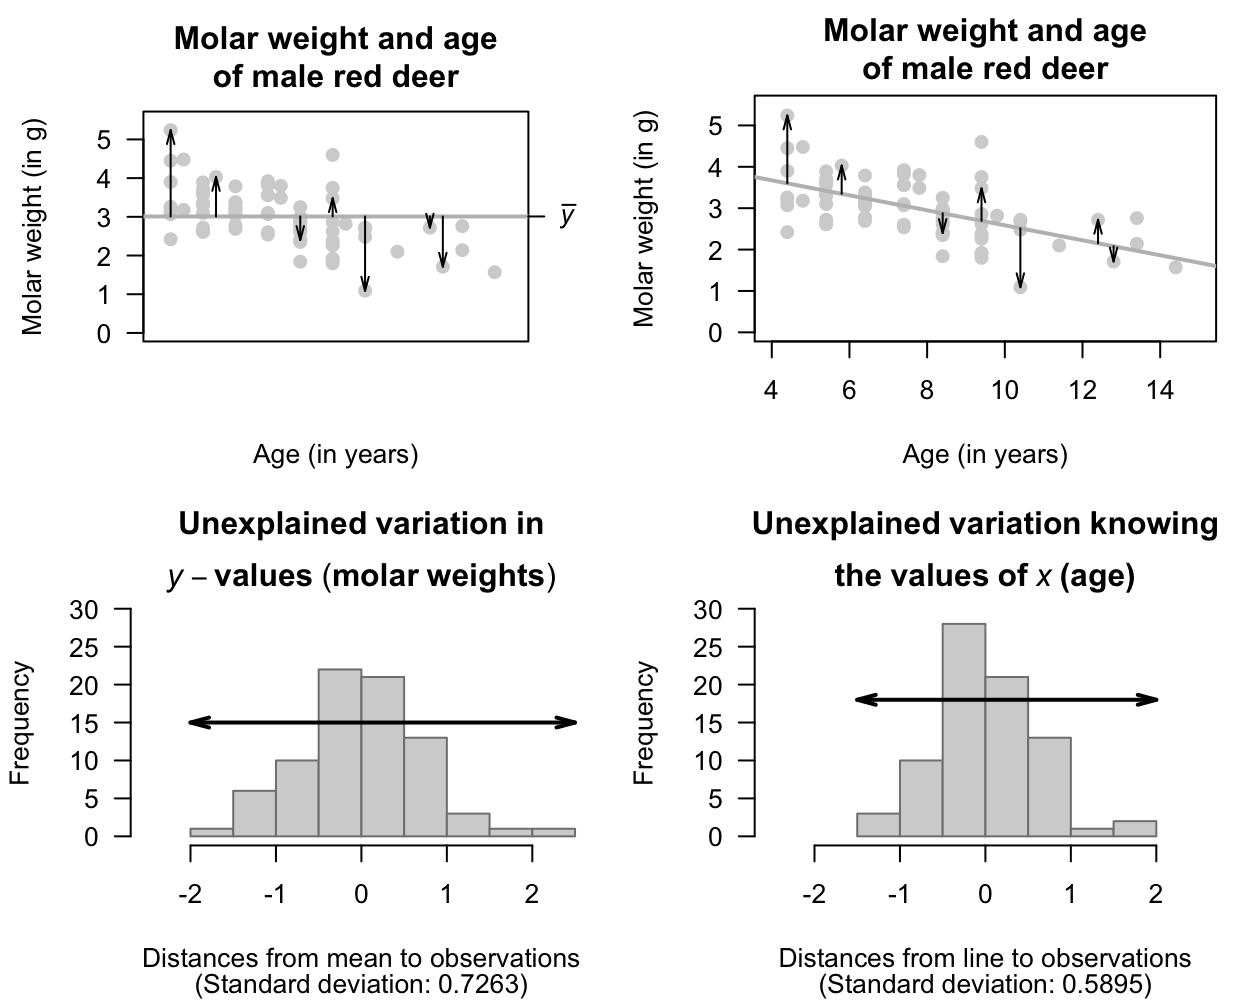 The unexplained variation for the red-deer data. Left panels: when no information about the age of the deer is used, the mean (the horizontal grey line in the top panel) is the best summary of the molar weight. Right panels: When information about the age of the deer is used (as shown the grey line in the top panel), the distances are shorter in general.